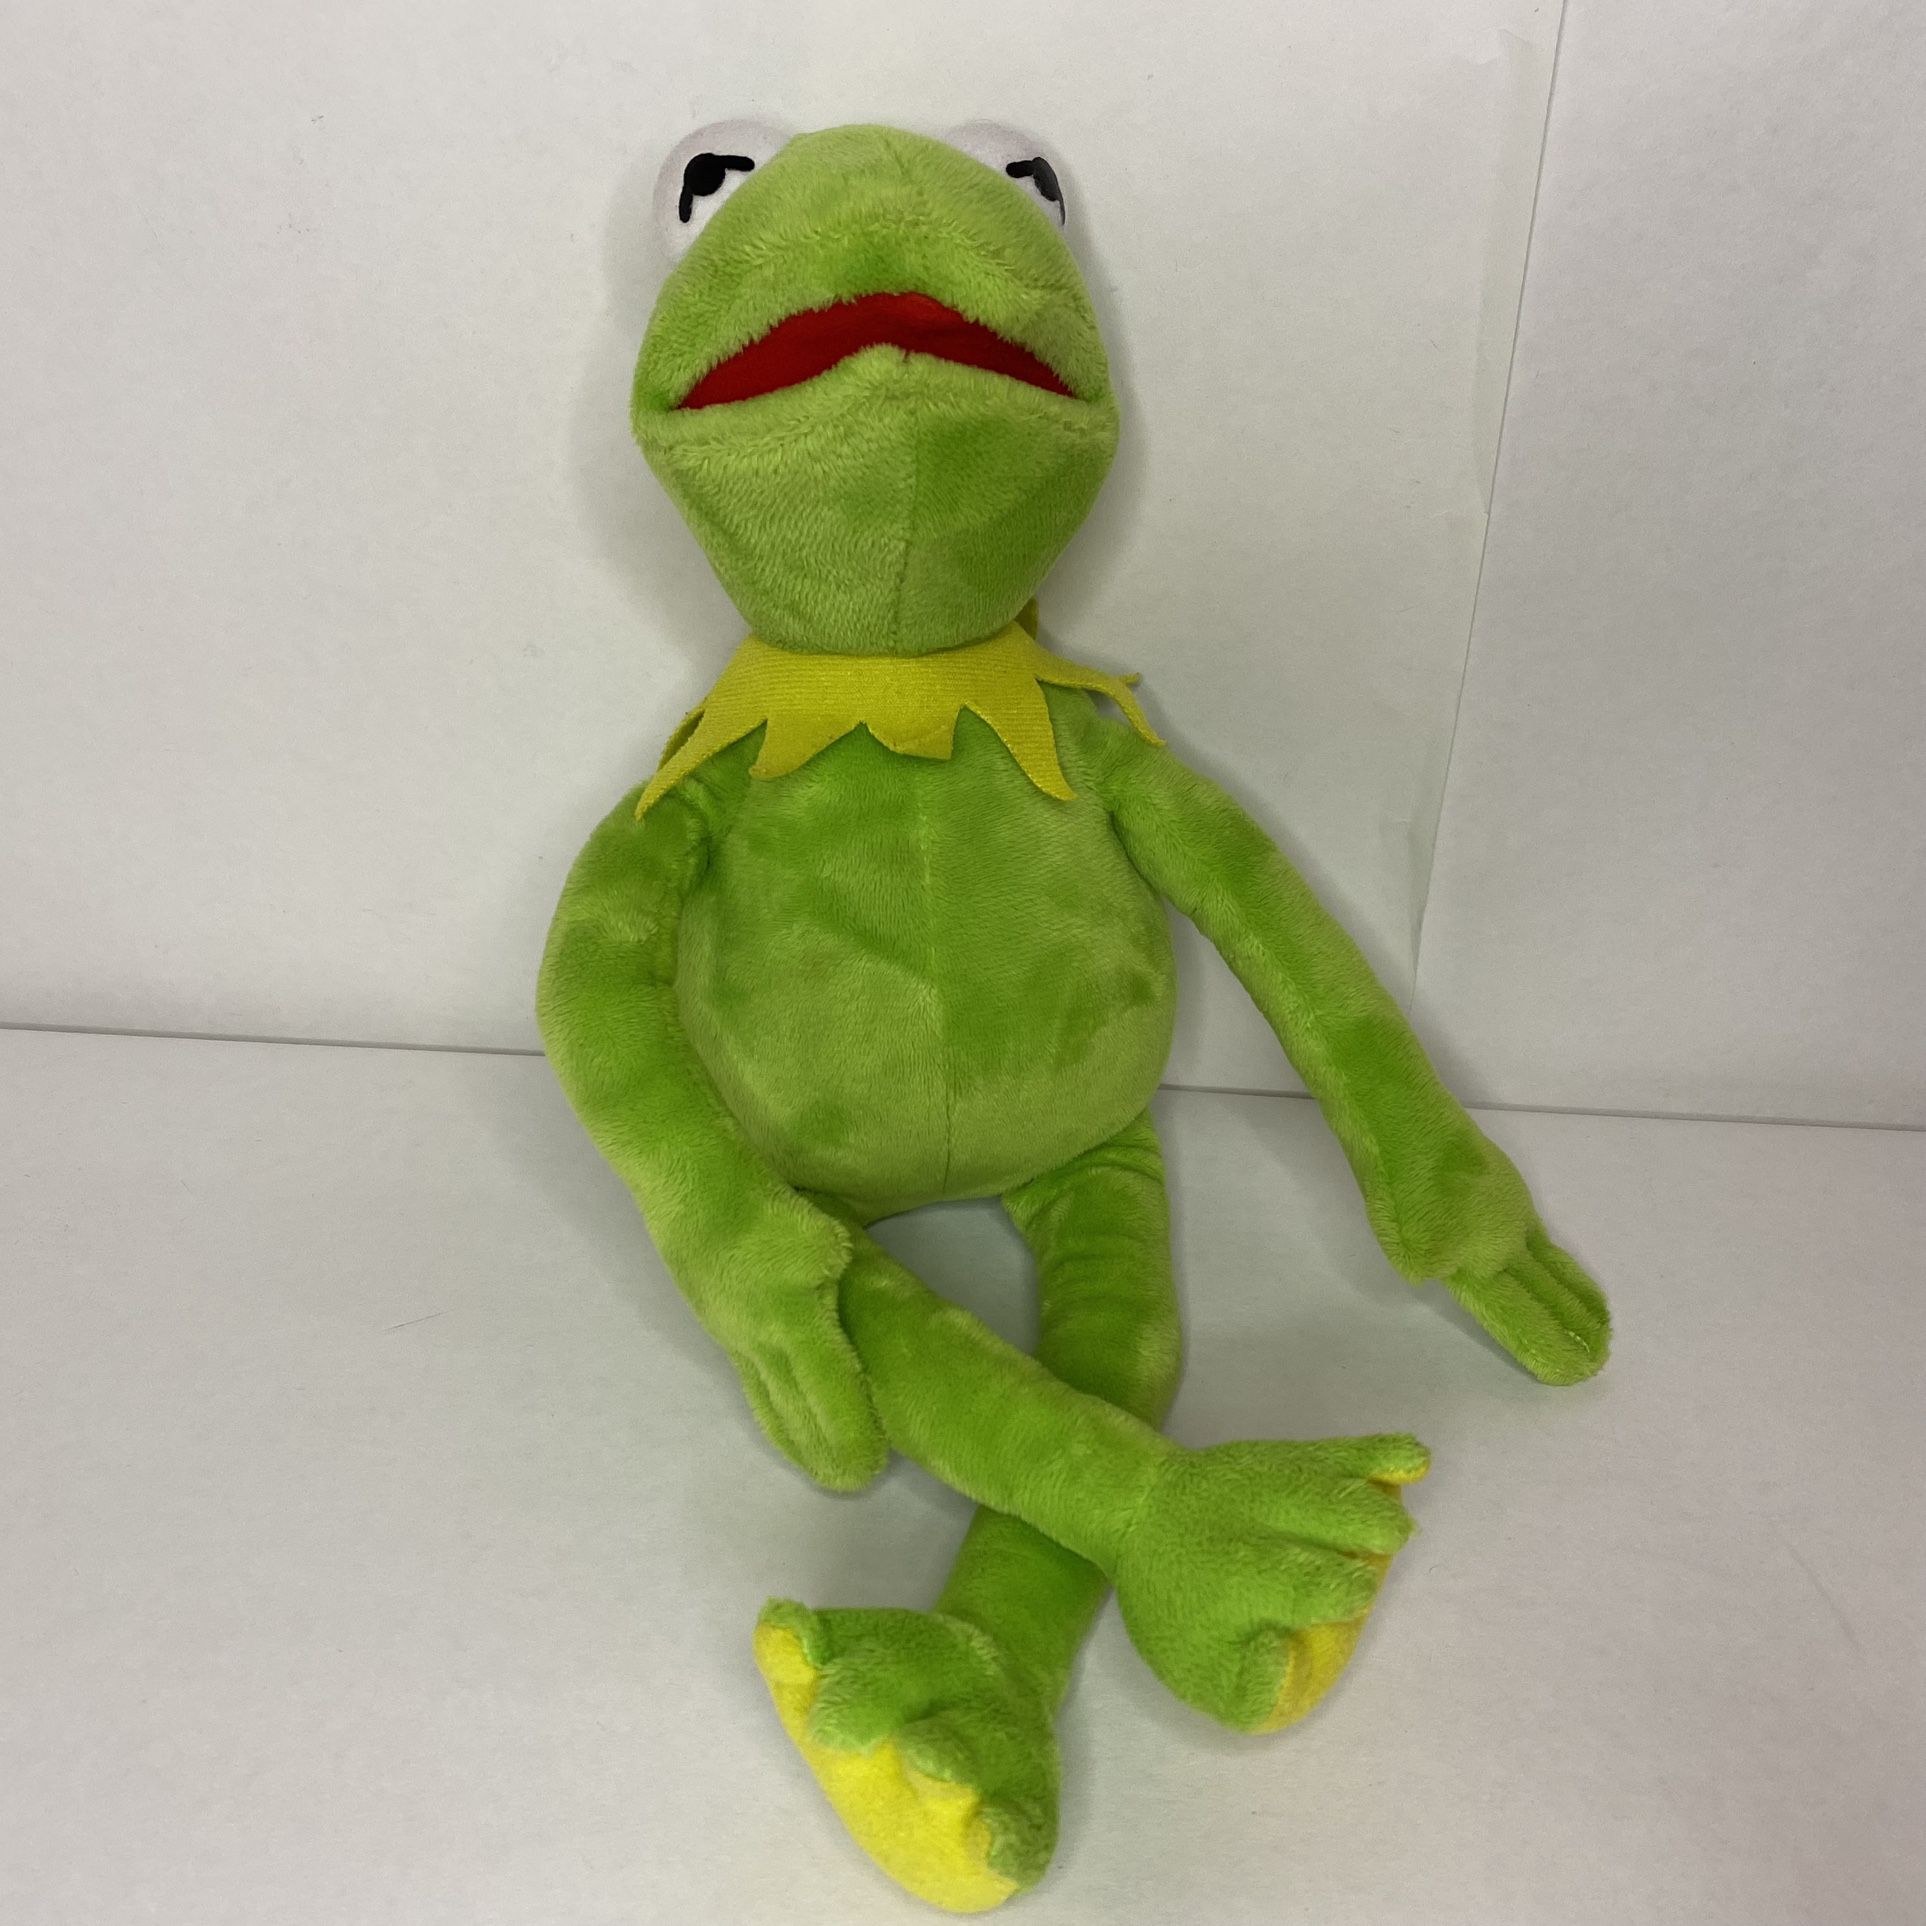 TY Muppets Kermit the Frog Plush Doll Disney 2016 Beanie Baby 15" Tall Poseable